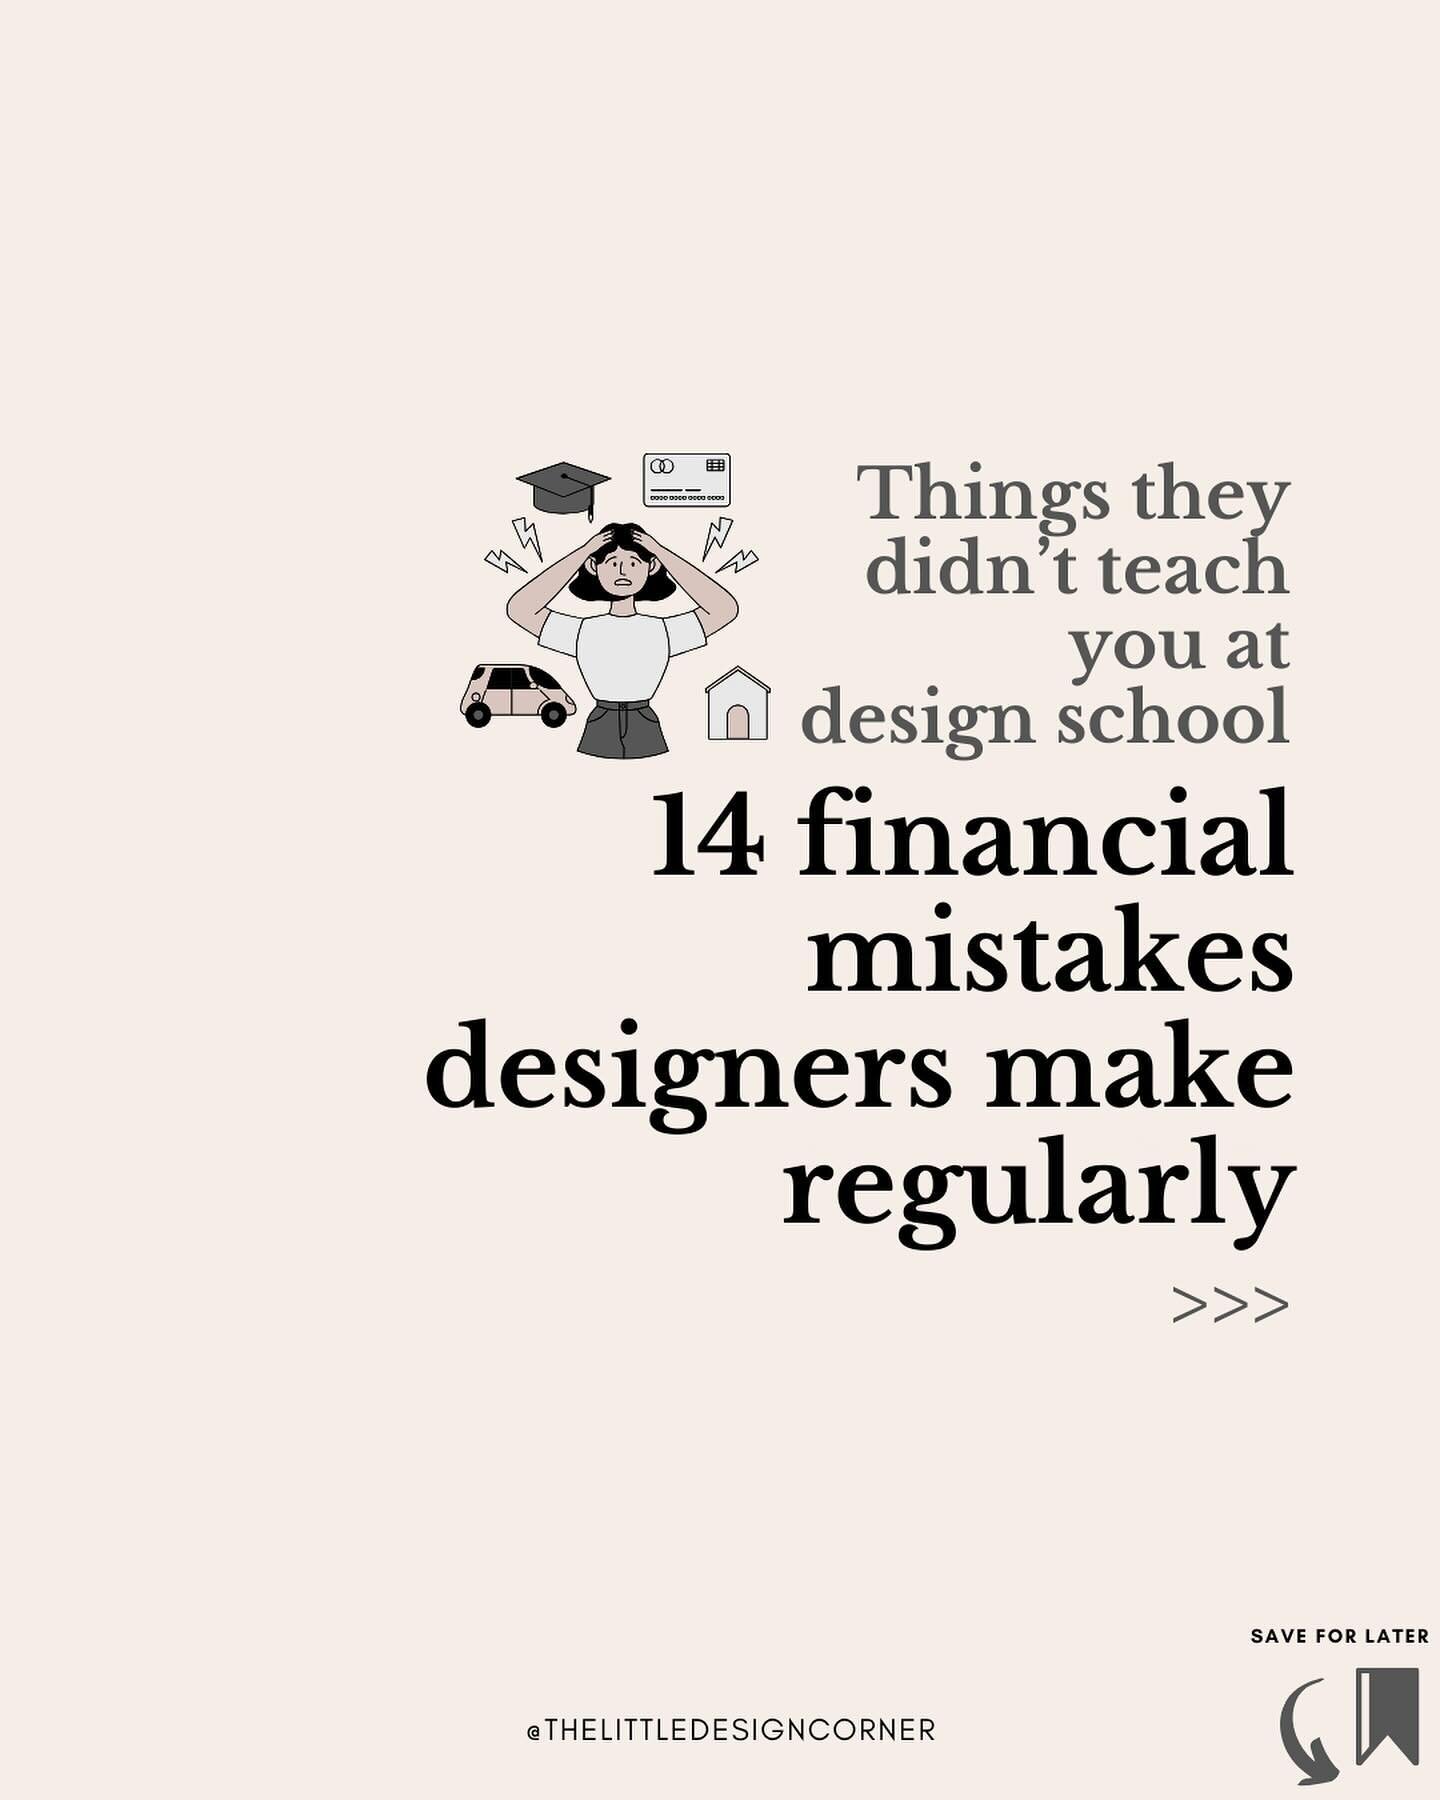 How many of these financial mistakes are you making in your design business? 🤔⬇️

Financial management is a critical skill set for business owners but isn&rsquo;t something we are taught at design school. 

It&rsquo;s up to us to seek out the educat